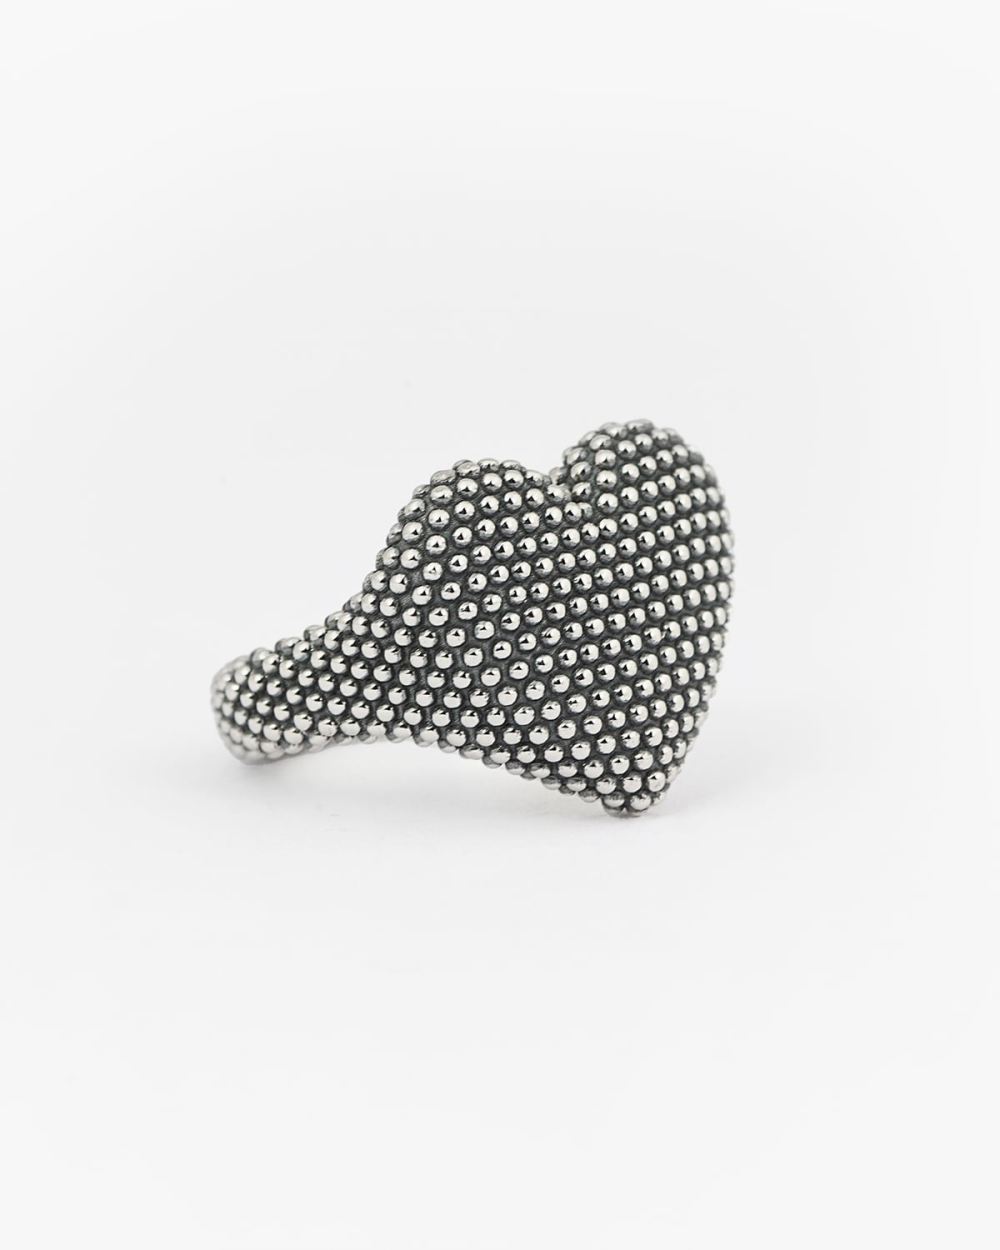 DOTTED HEART SIGNET RING